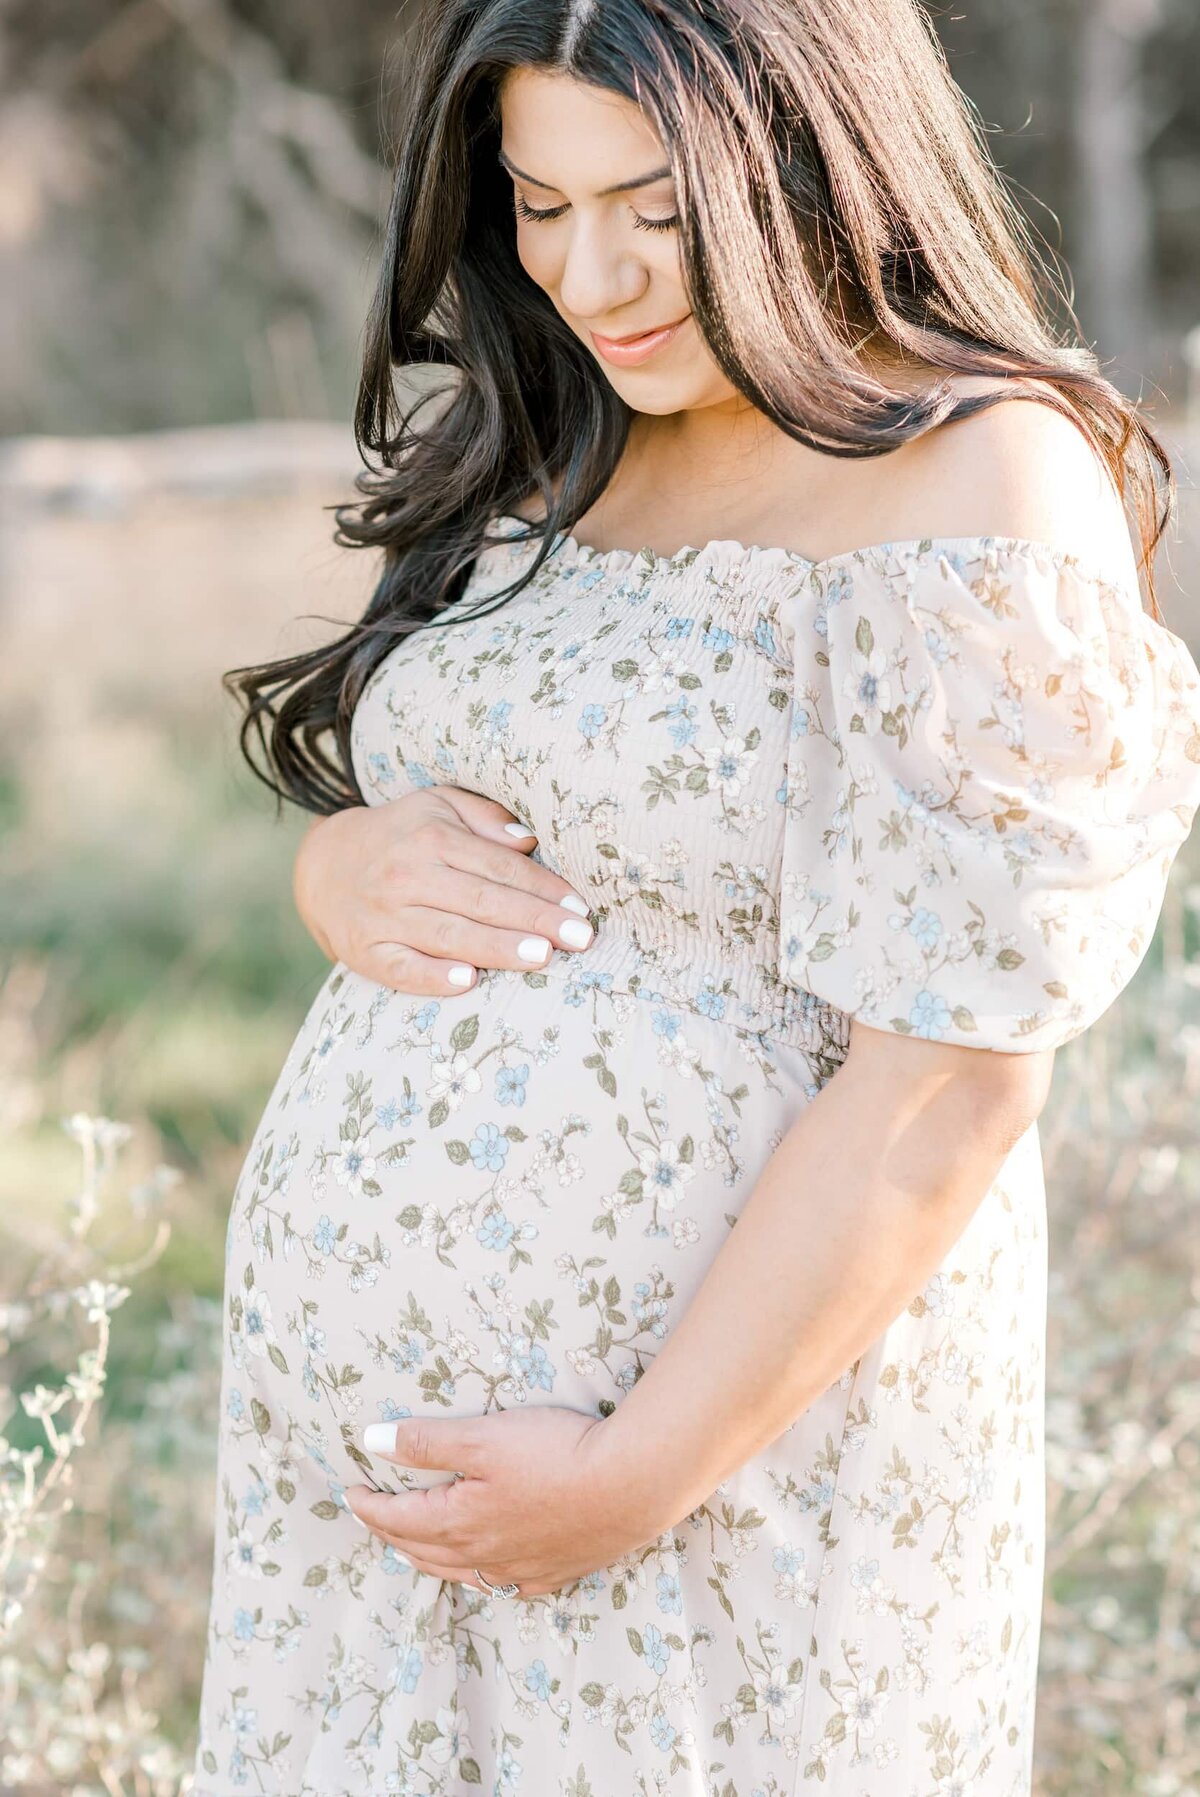 San-Antonio-Maternity-Photography-3.4.23- Melanie_s Maternity Session- Laurie Adalle Photography-22